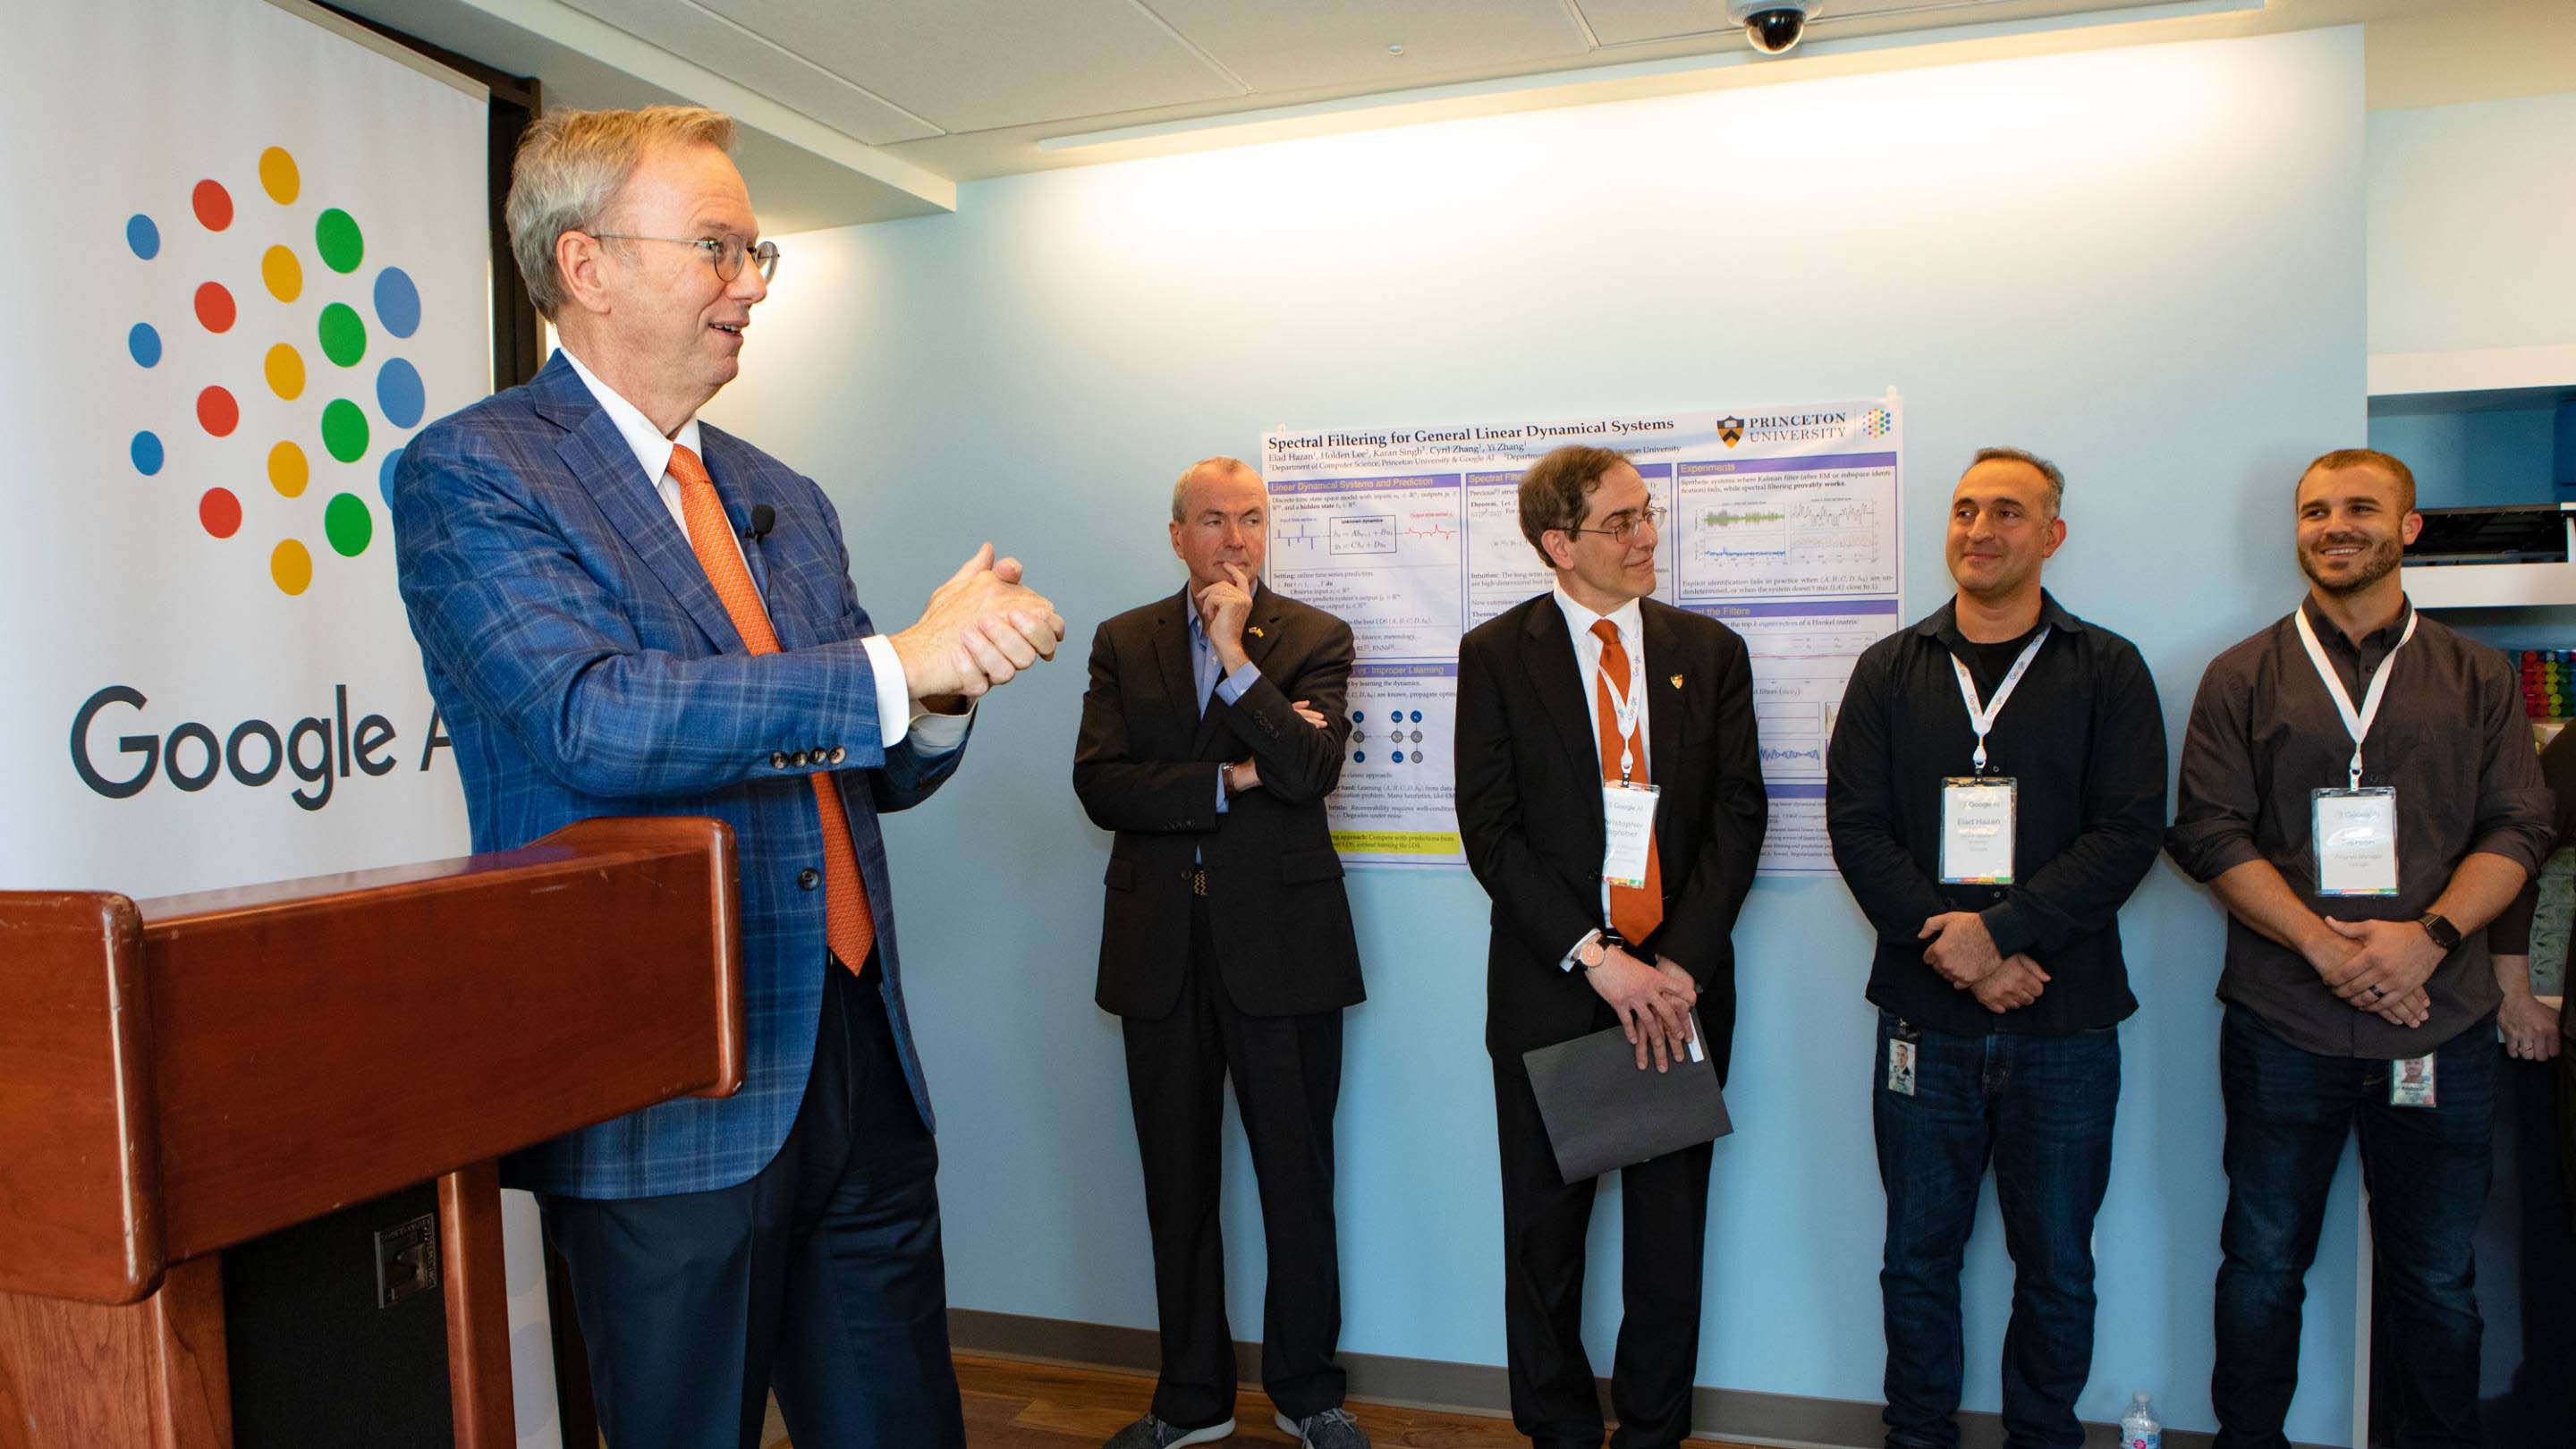 Eric Schmidt stands in front of lectern during ribbon cutting